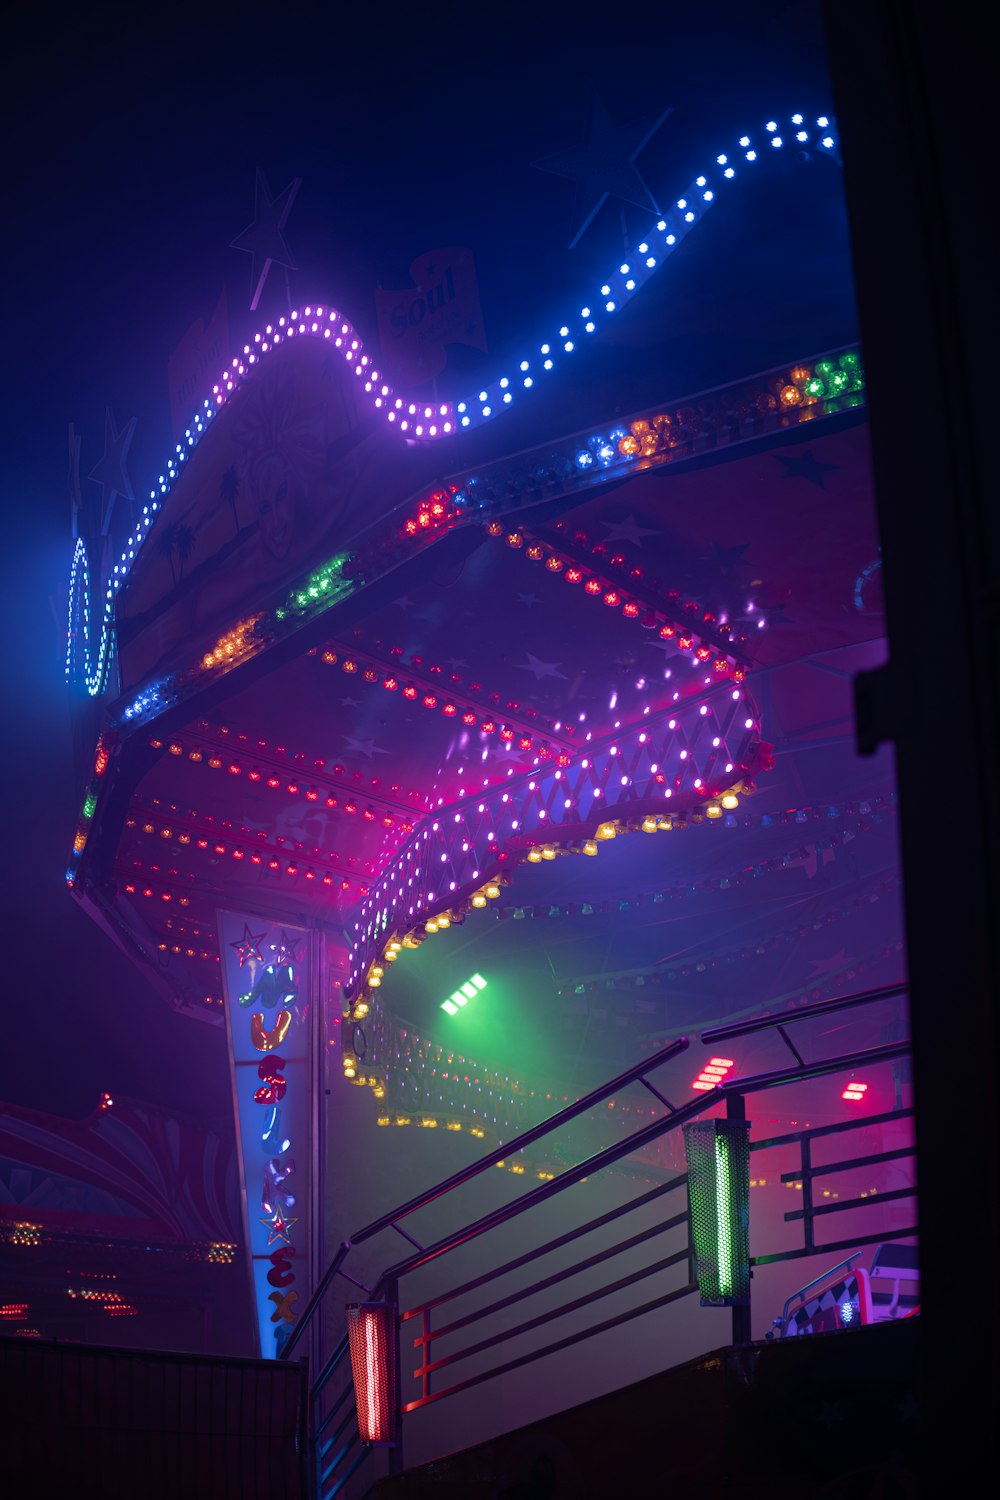 a carnival ride lit up at night with colorful lights